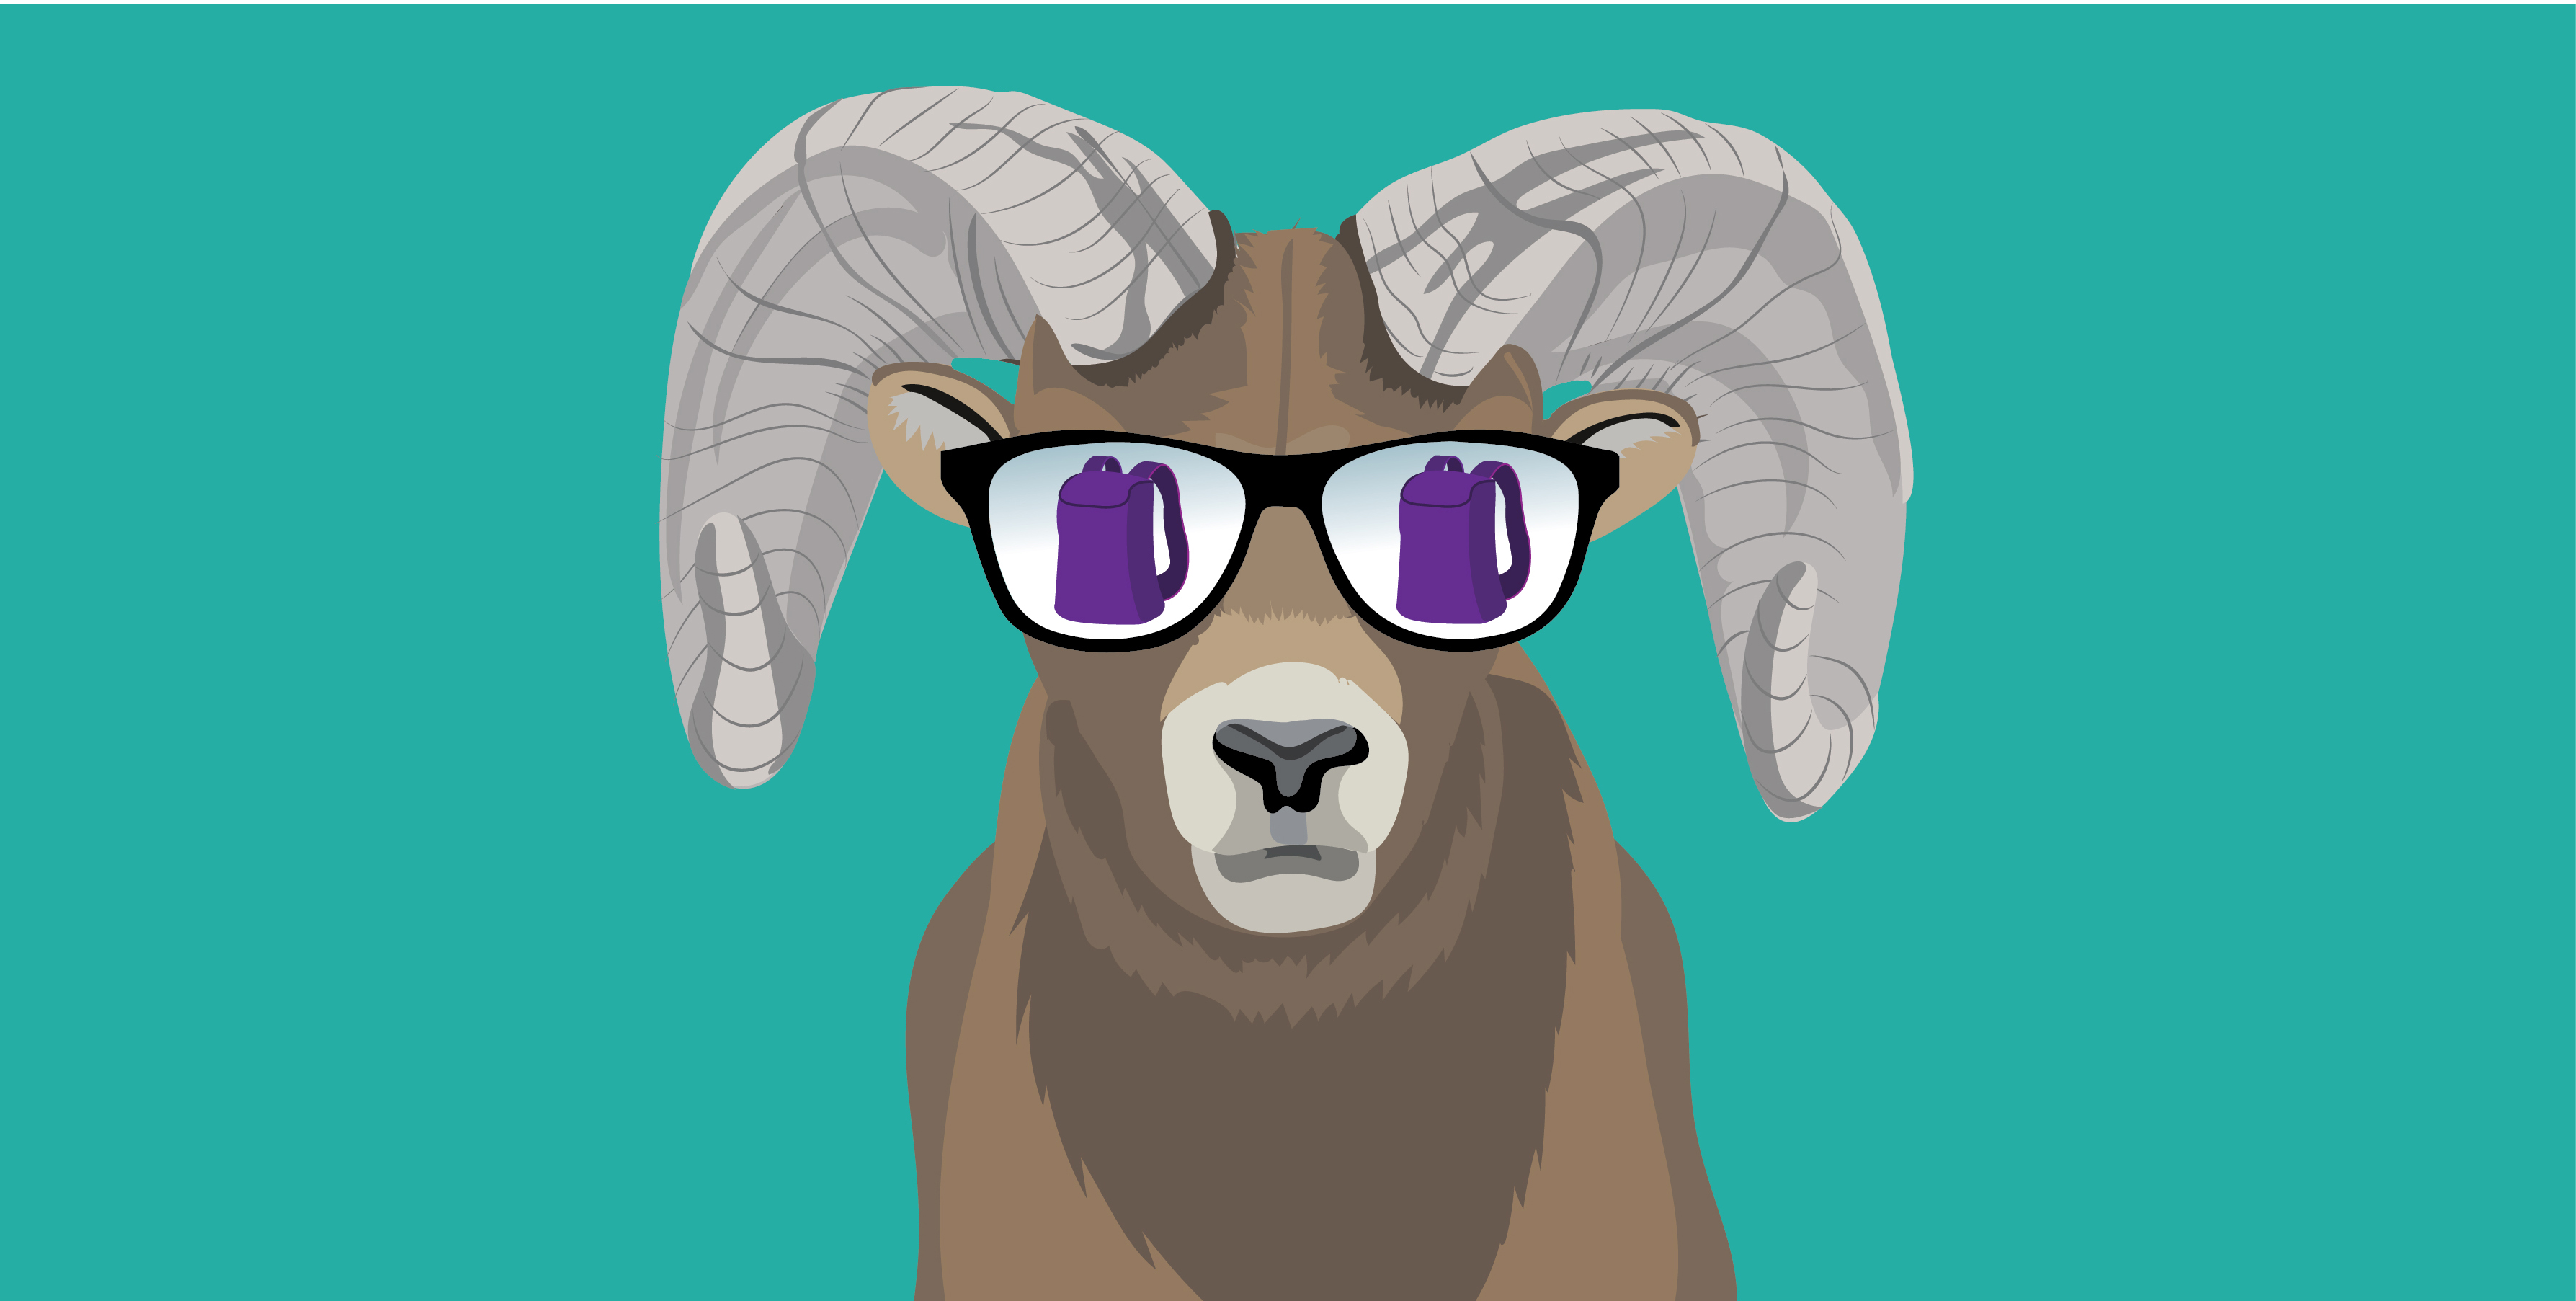 Drawing of a bighorn sheep wearing sunglasses on a turquoise background. A purple backpack is in the reflection of the sunglasses.